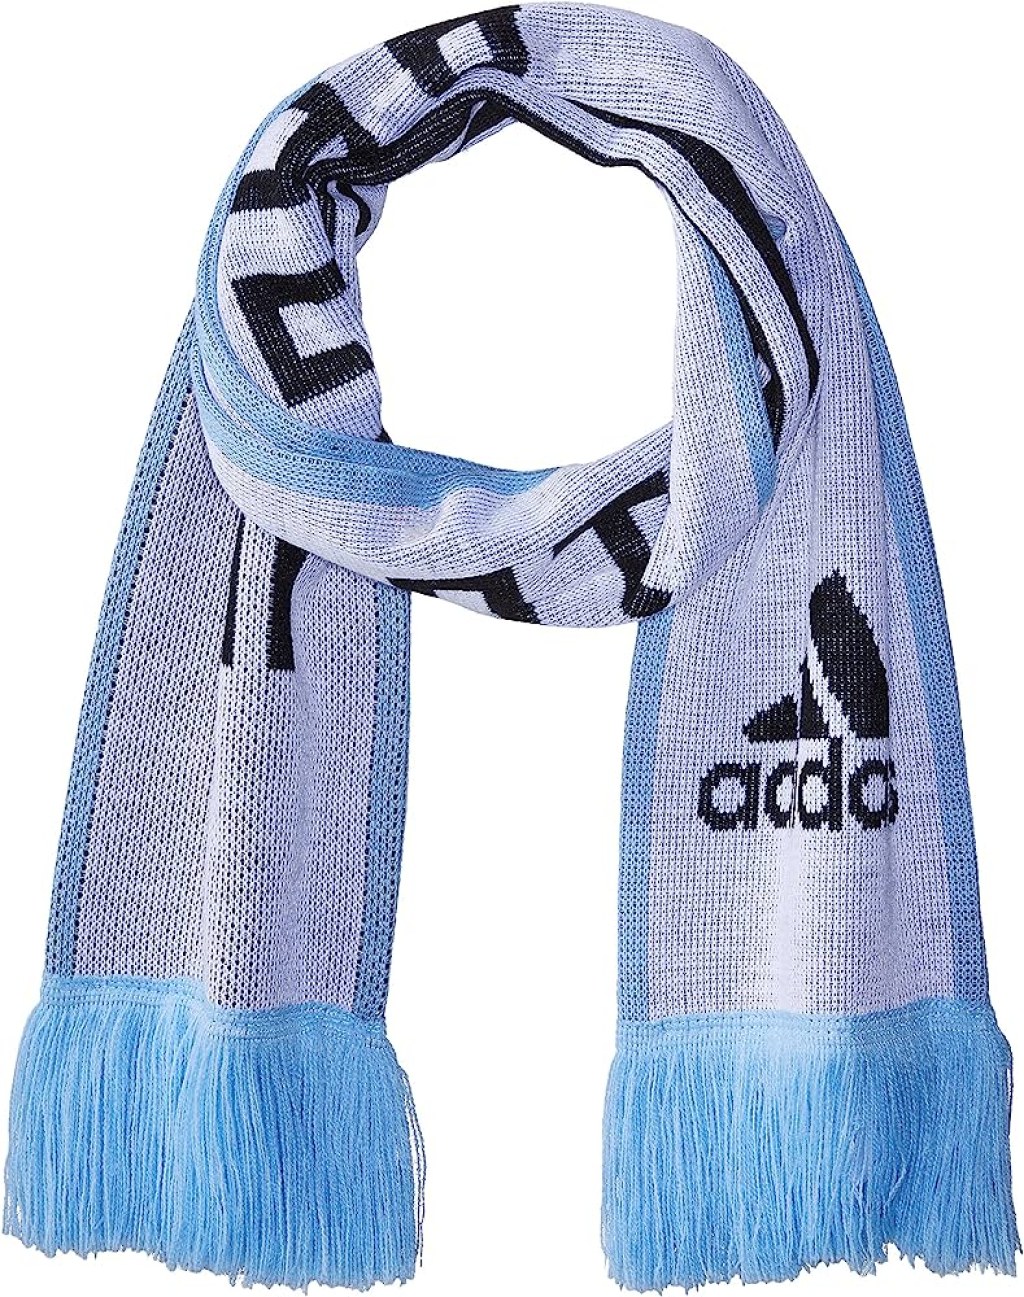 Picture of: adidas Argentina World Cup Scarf : Amazon